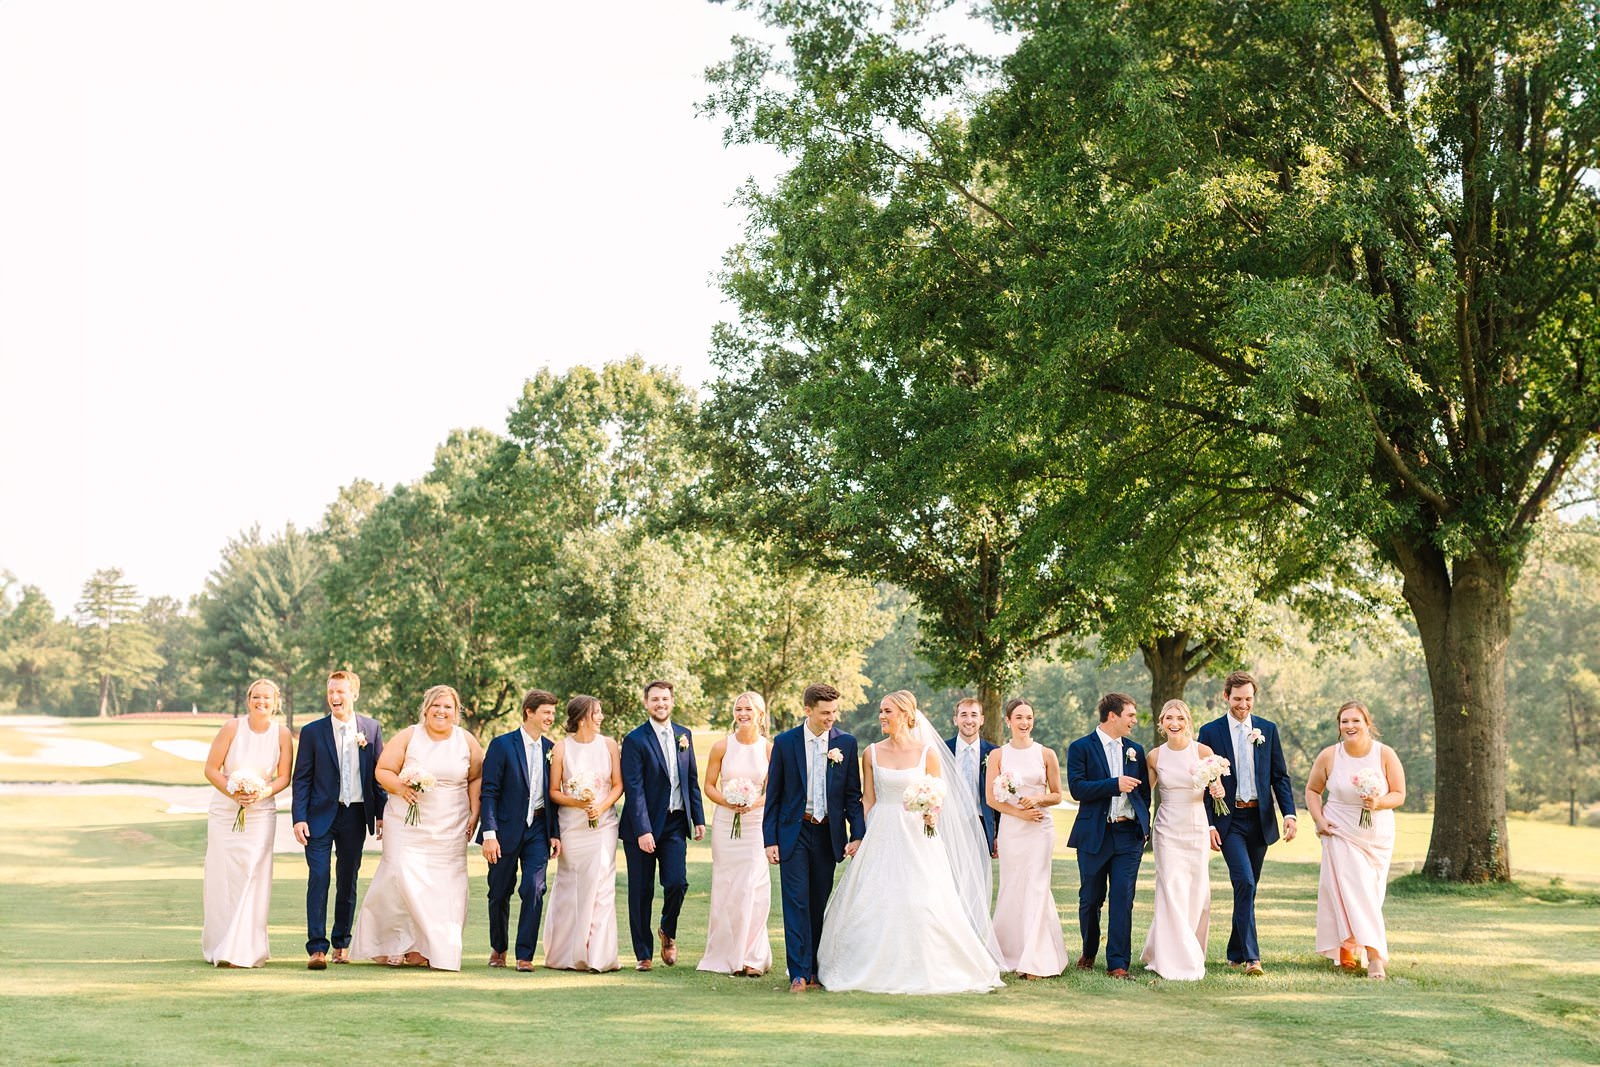 An Evansville Country Club Wedding | Ashley and Beau | Bret and Brandie Photography179.jpg